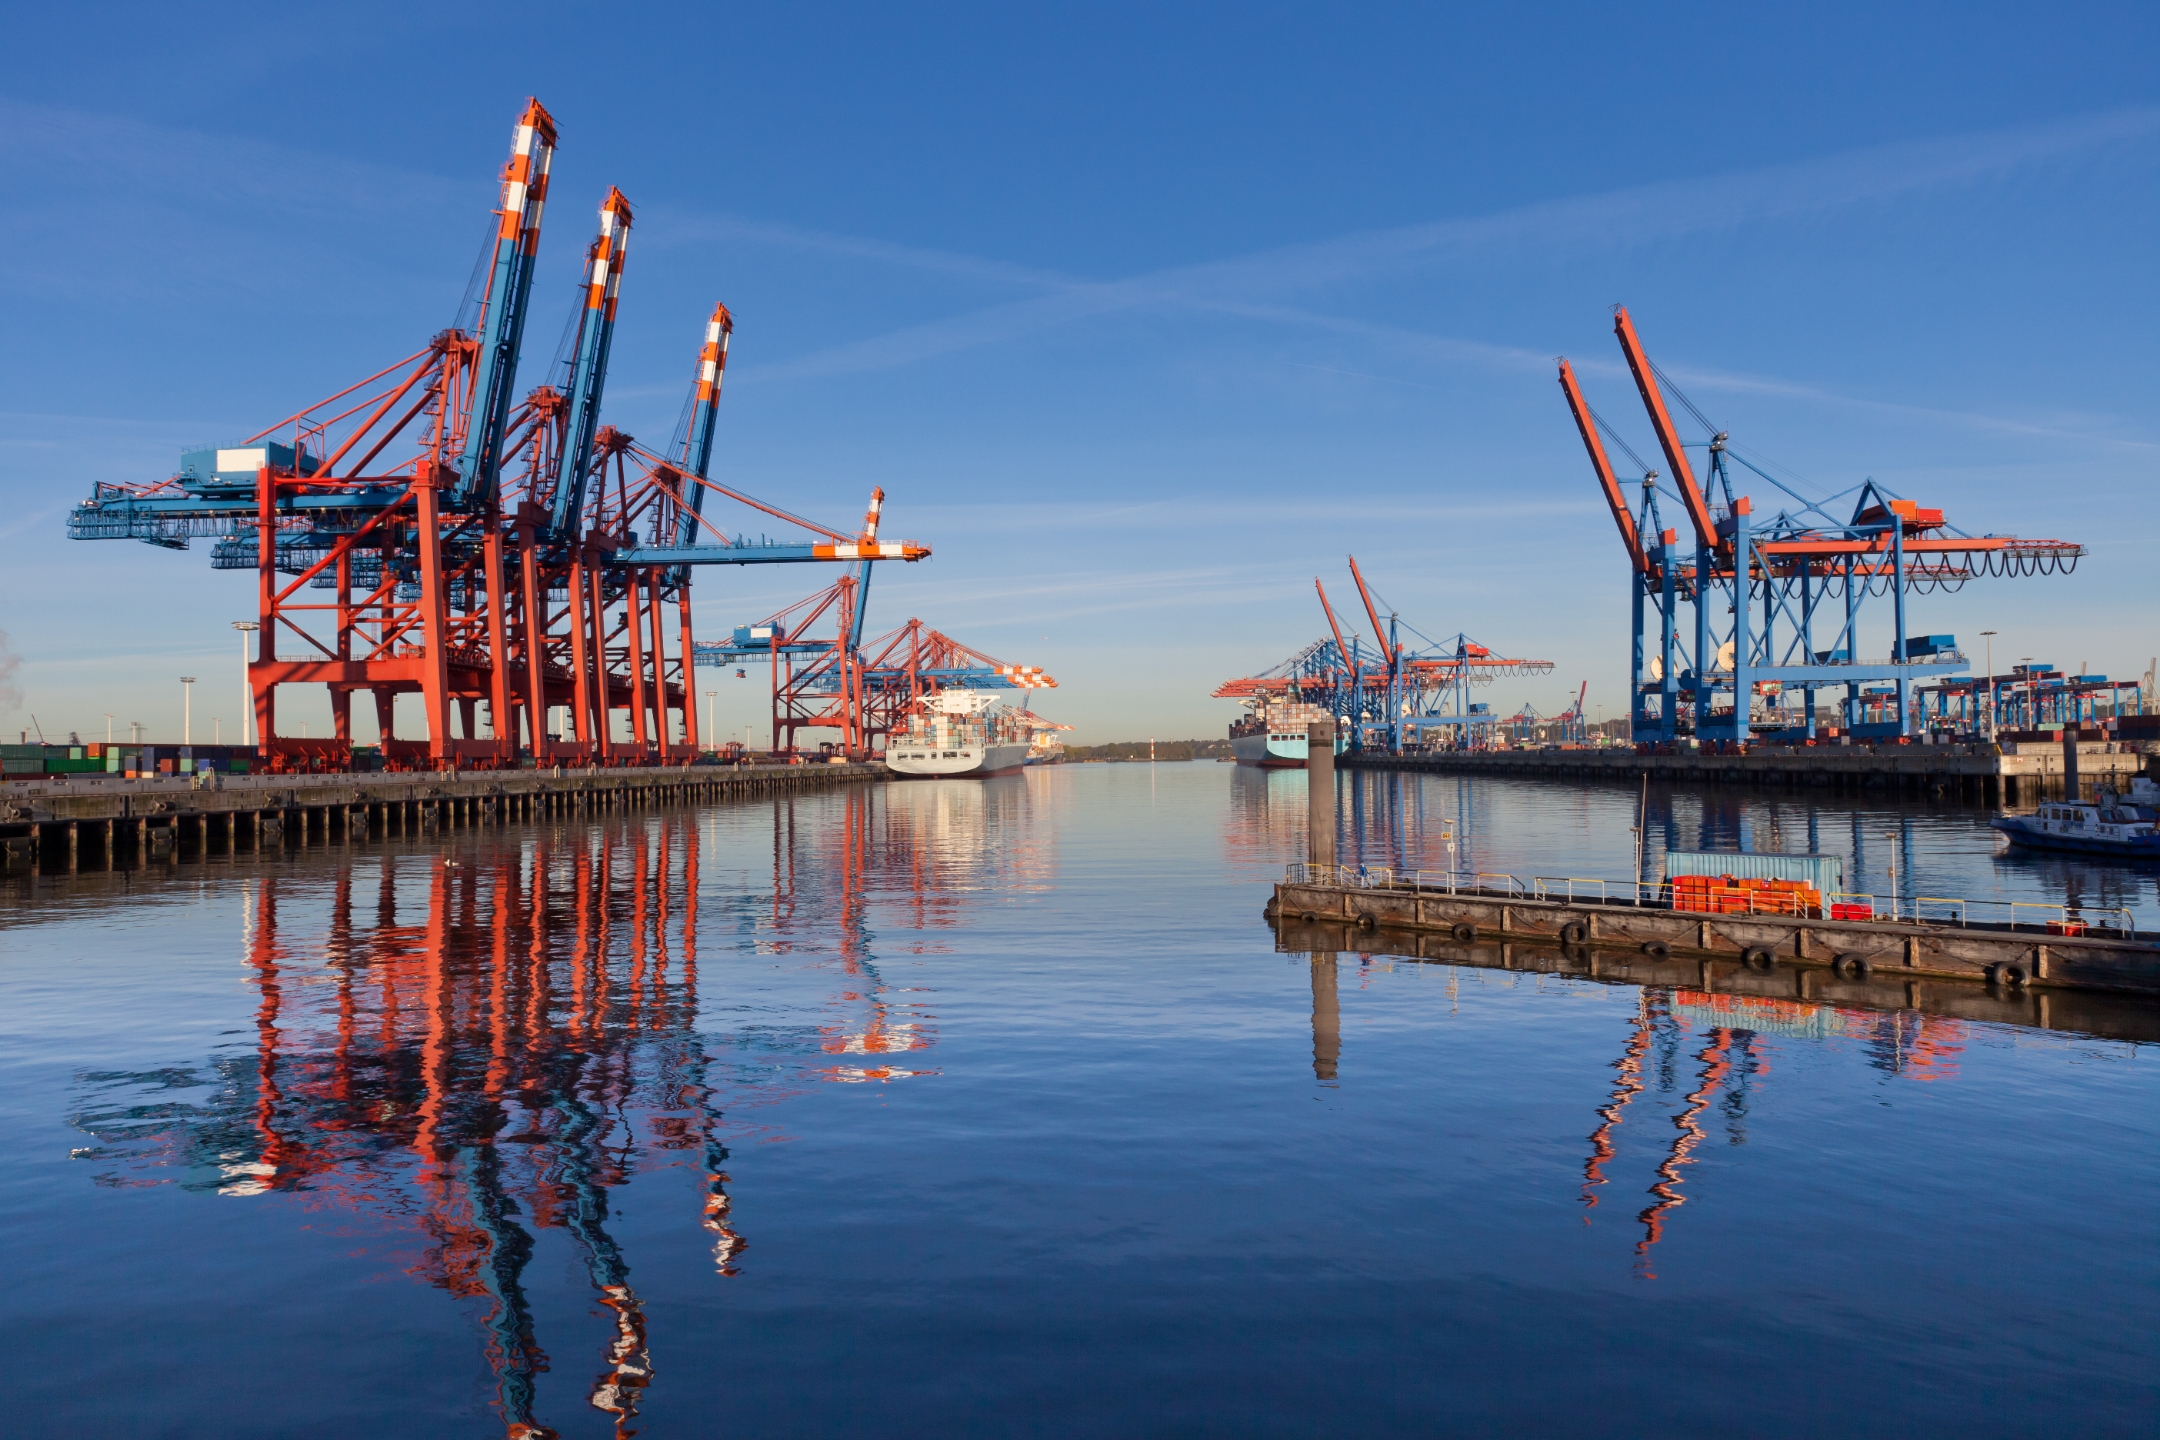 Two lines of cranes separated by a body of water in a harbor.